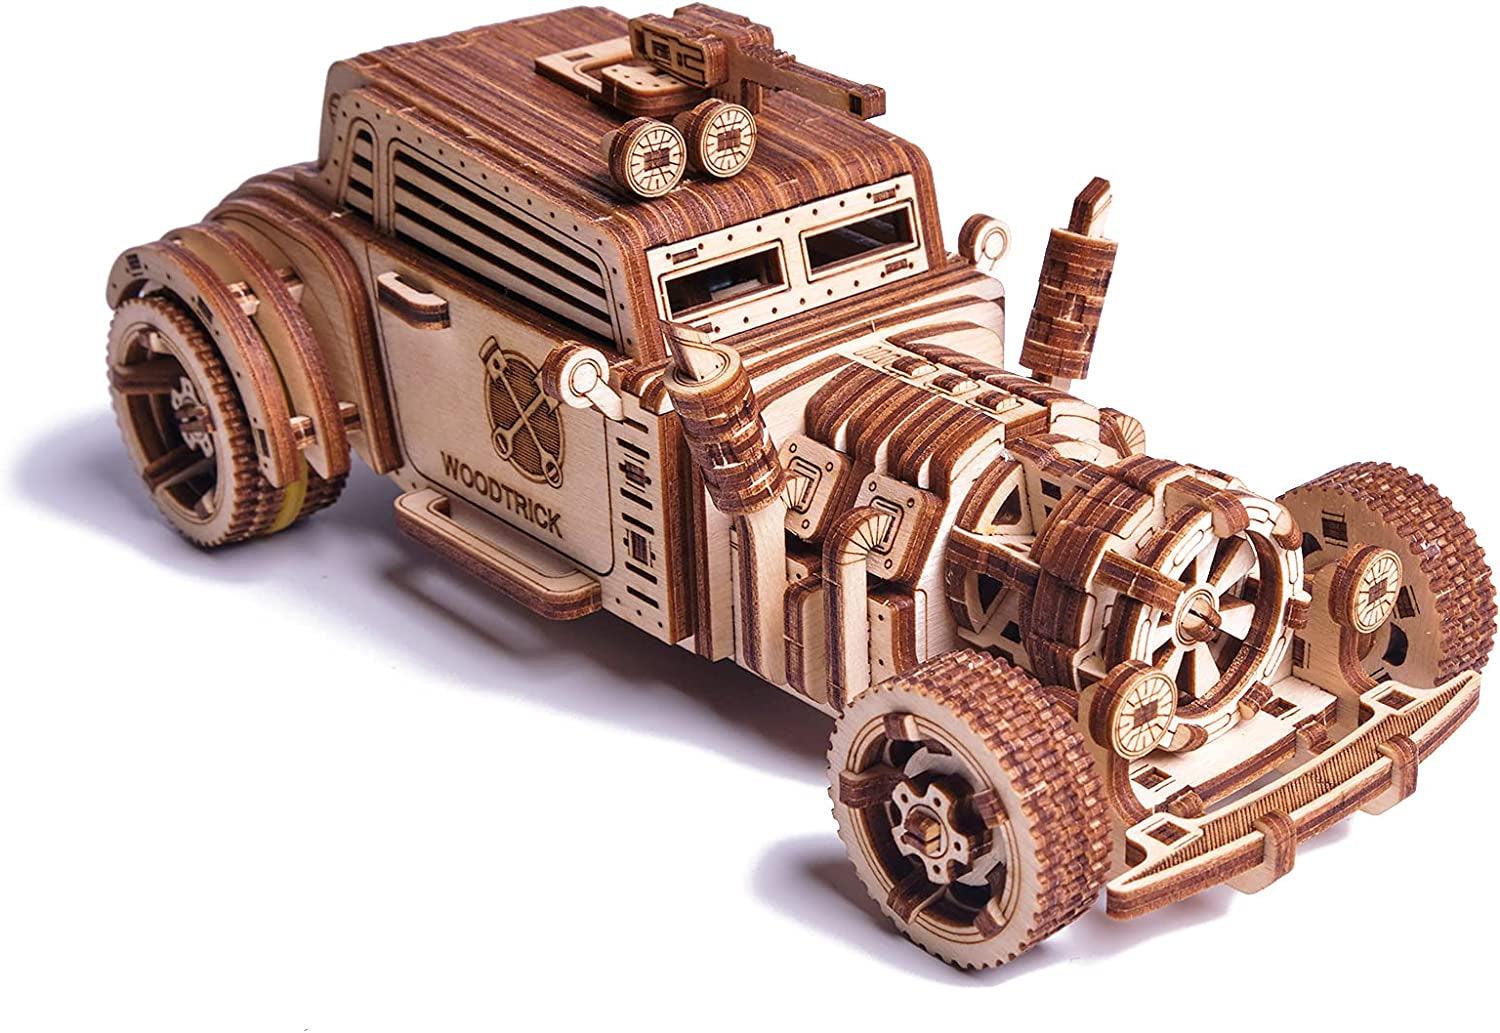 Wood Trick Apocalyptic Car 3D Wooden Puzzles for Adults and Kids to Build Rides up to 26 Feet Wooden Model Car Kits - WoodArtSupply